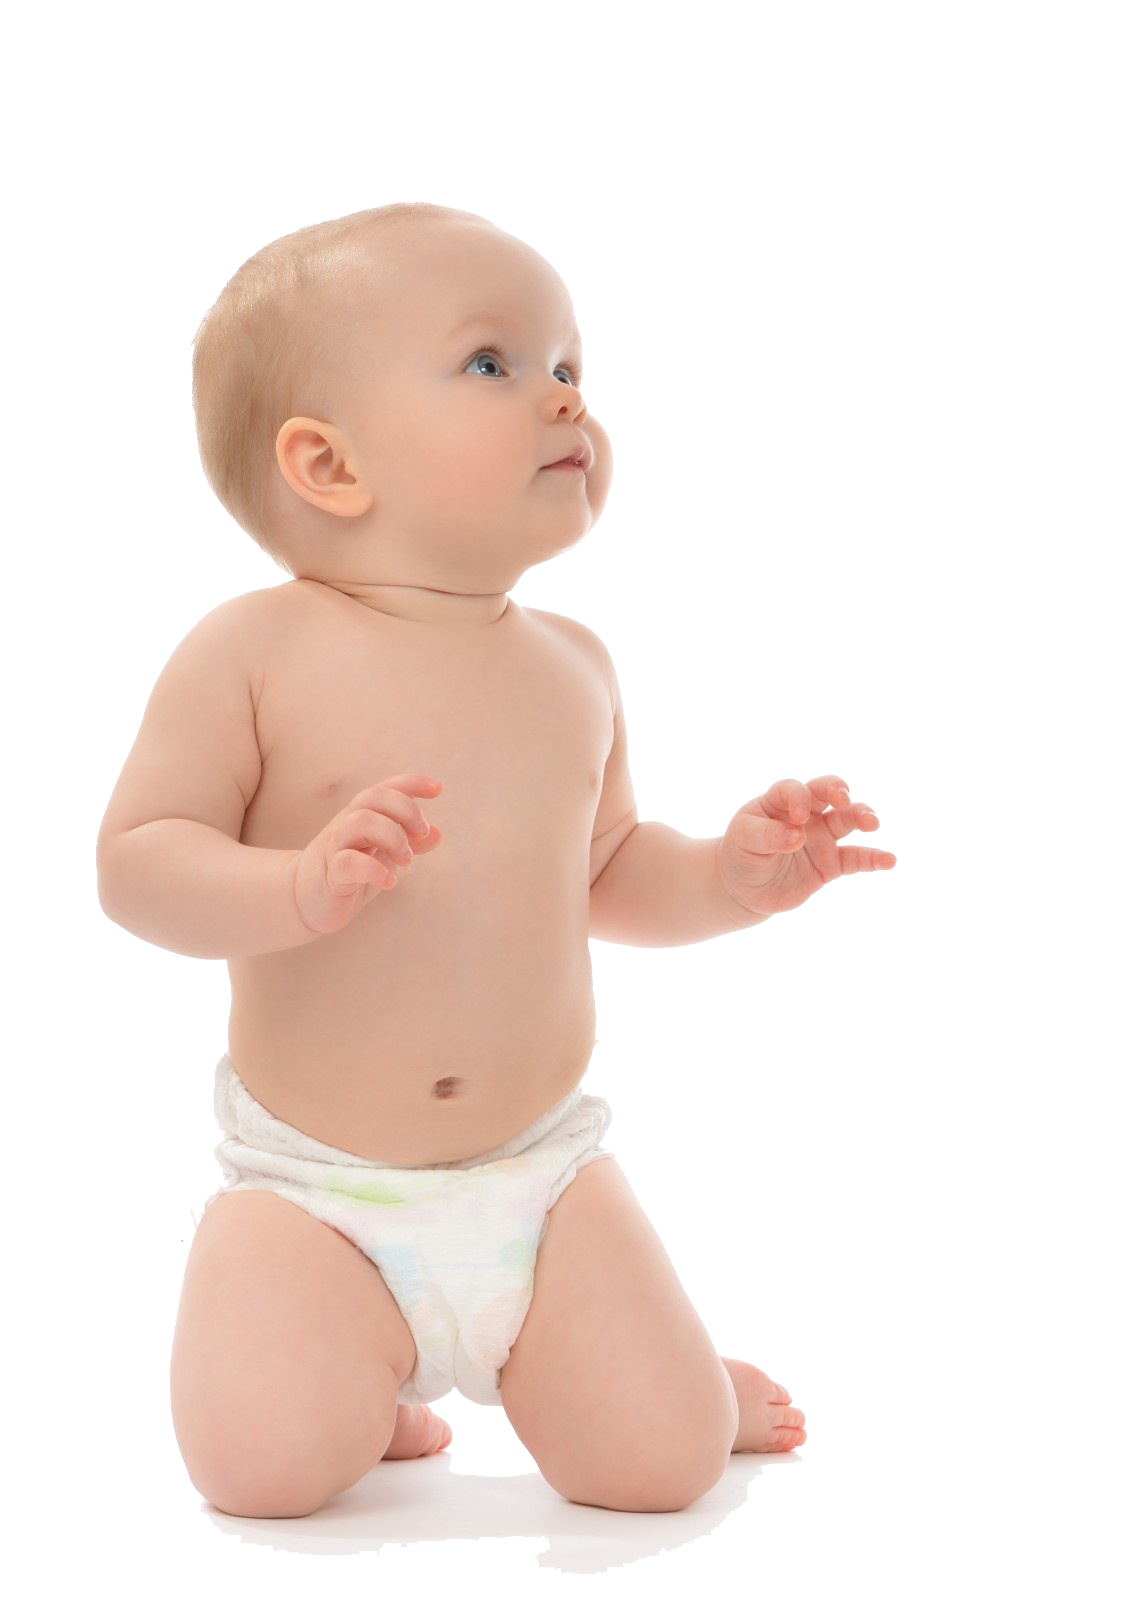 Little Baby Boy Png Free Download - Baby Boys, Transparent background PNG HD thumbnail